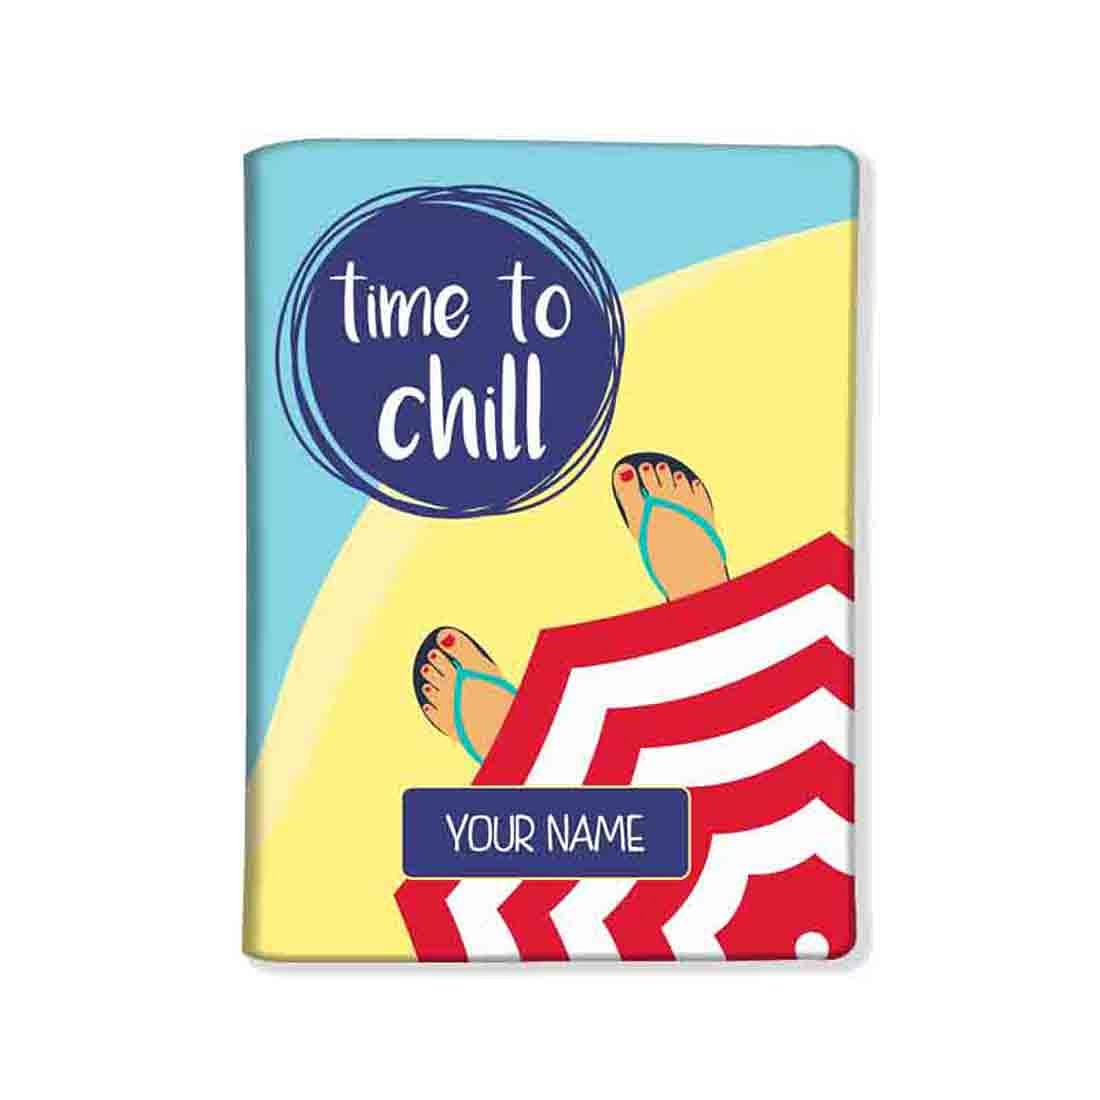 Classic Personalized Passport Cover -  Time To Chill Nutcase